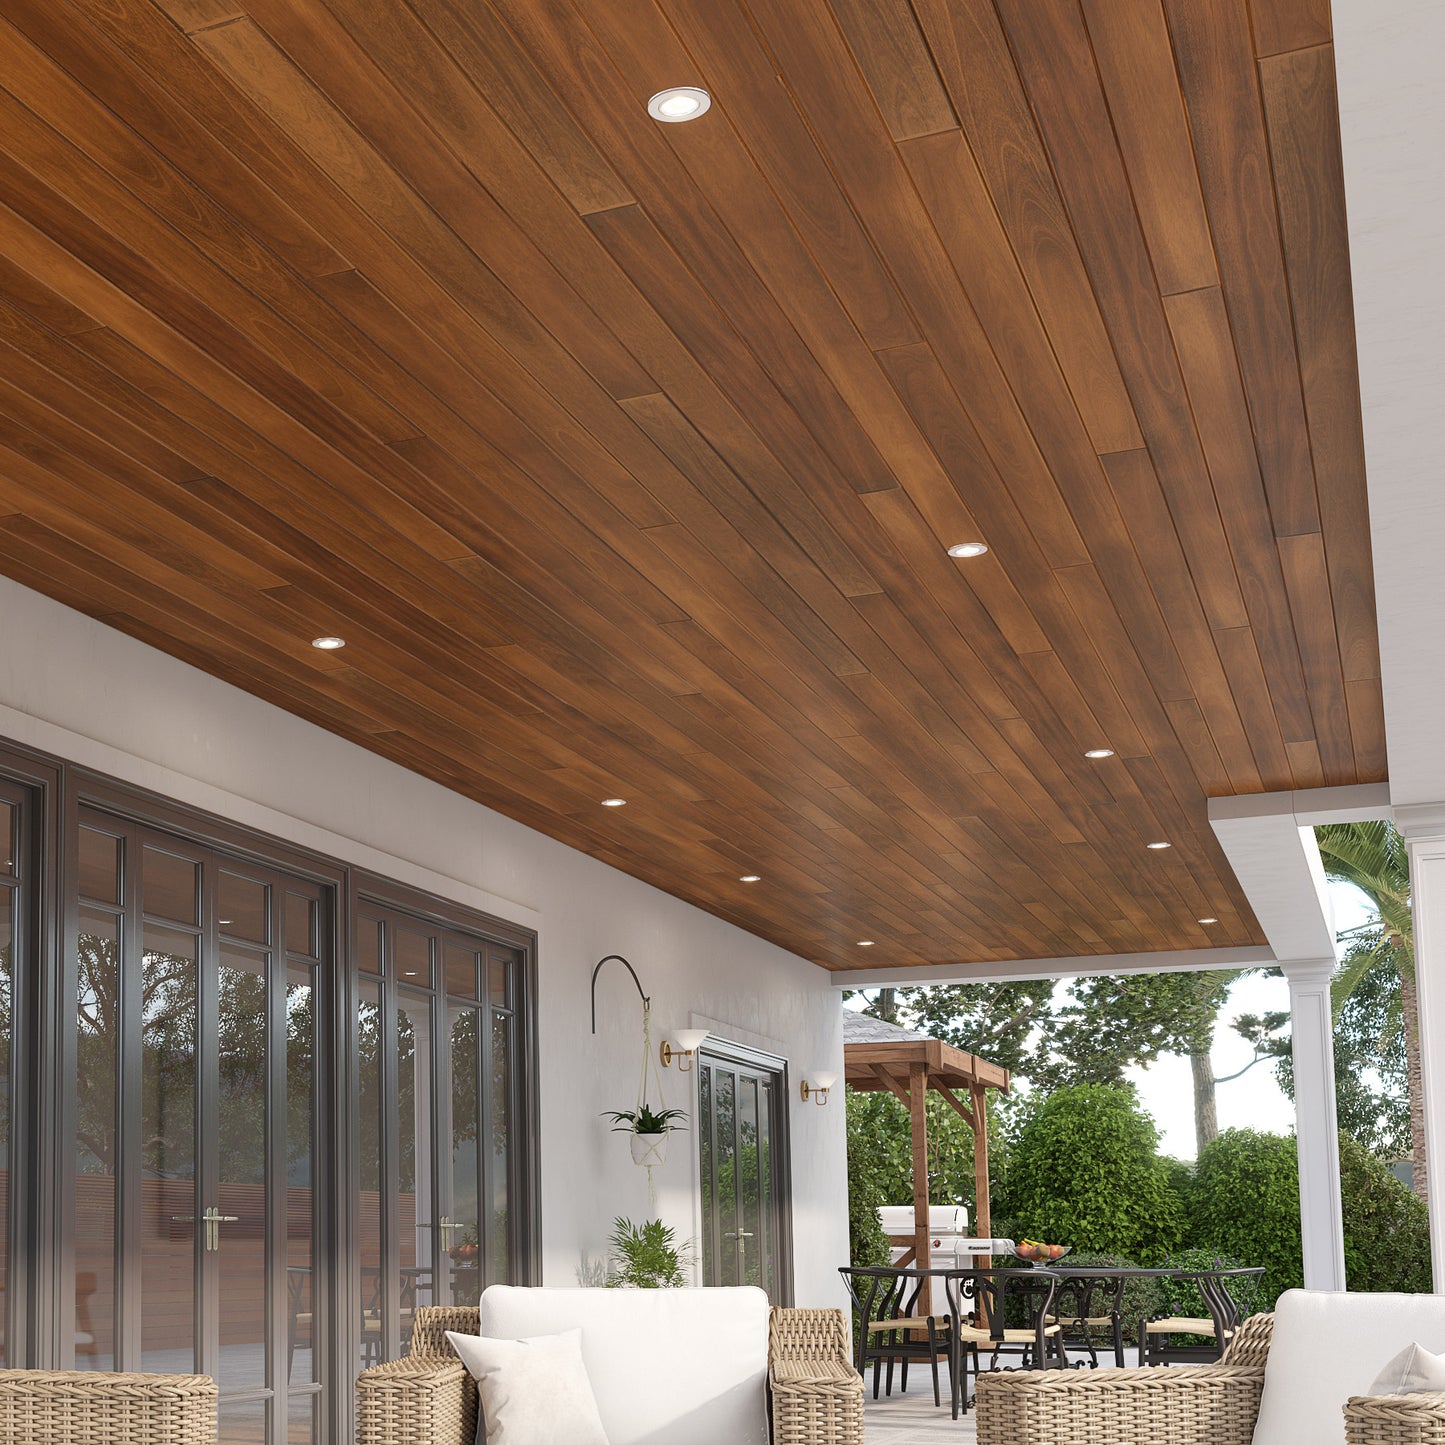 Synergy Wood® Red Grandis™